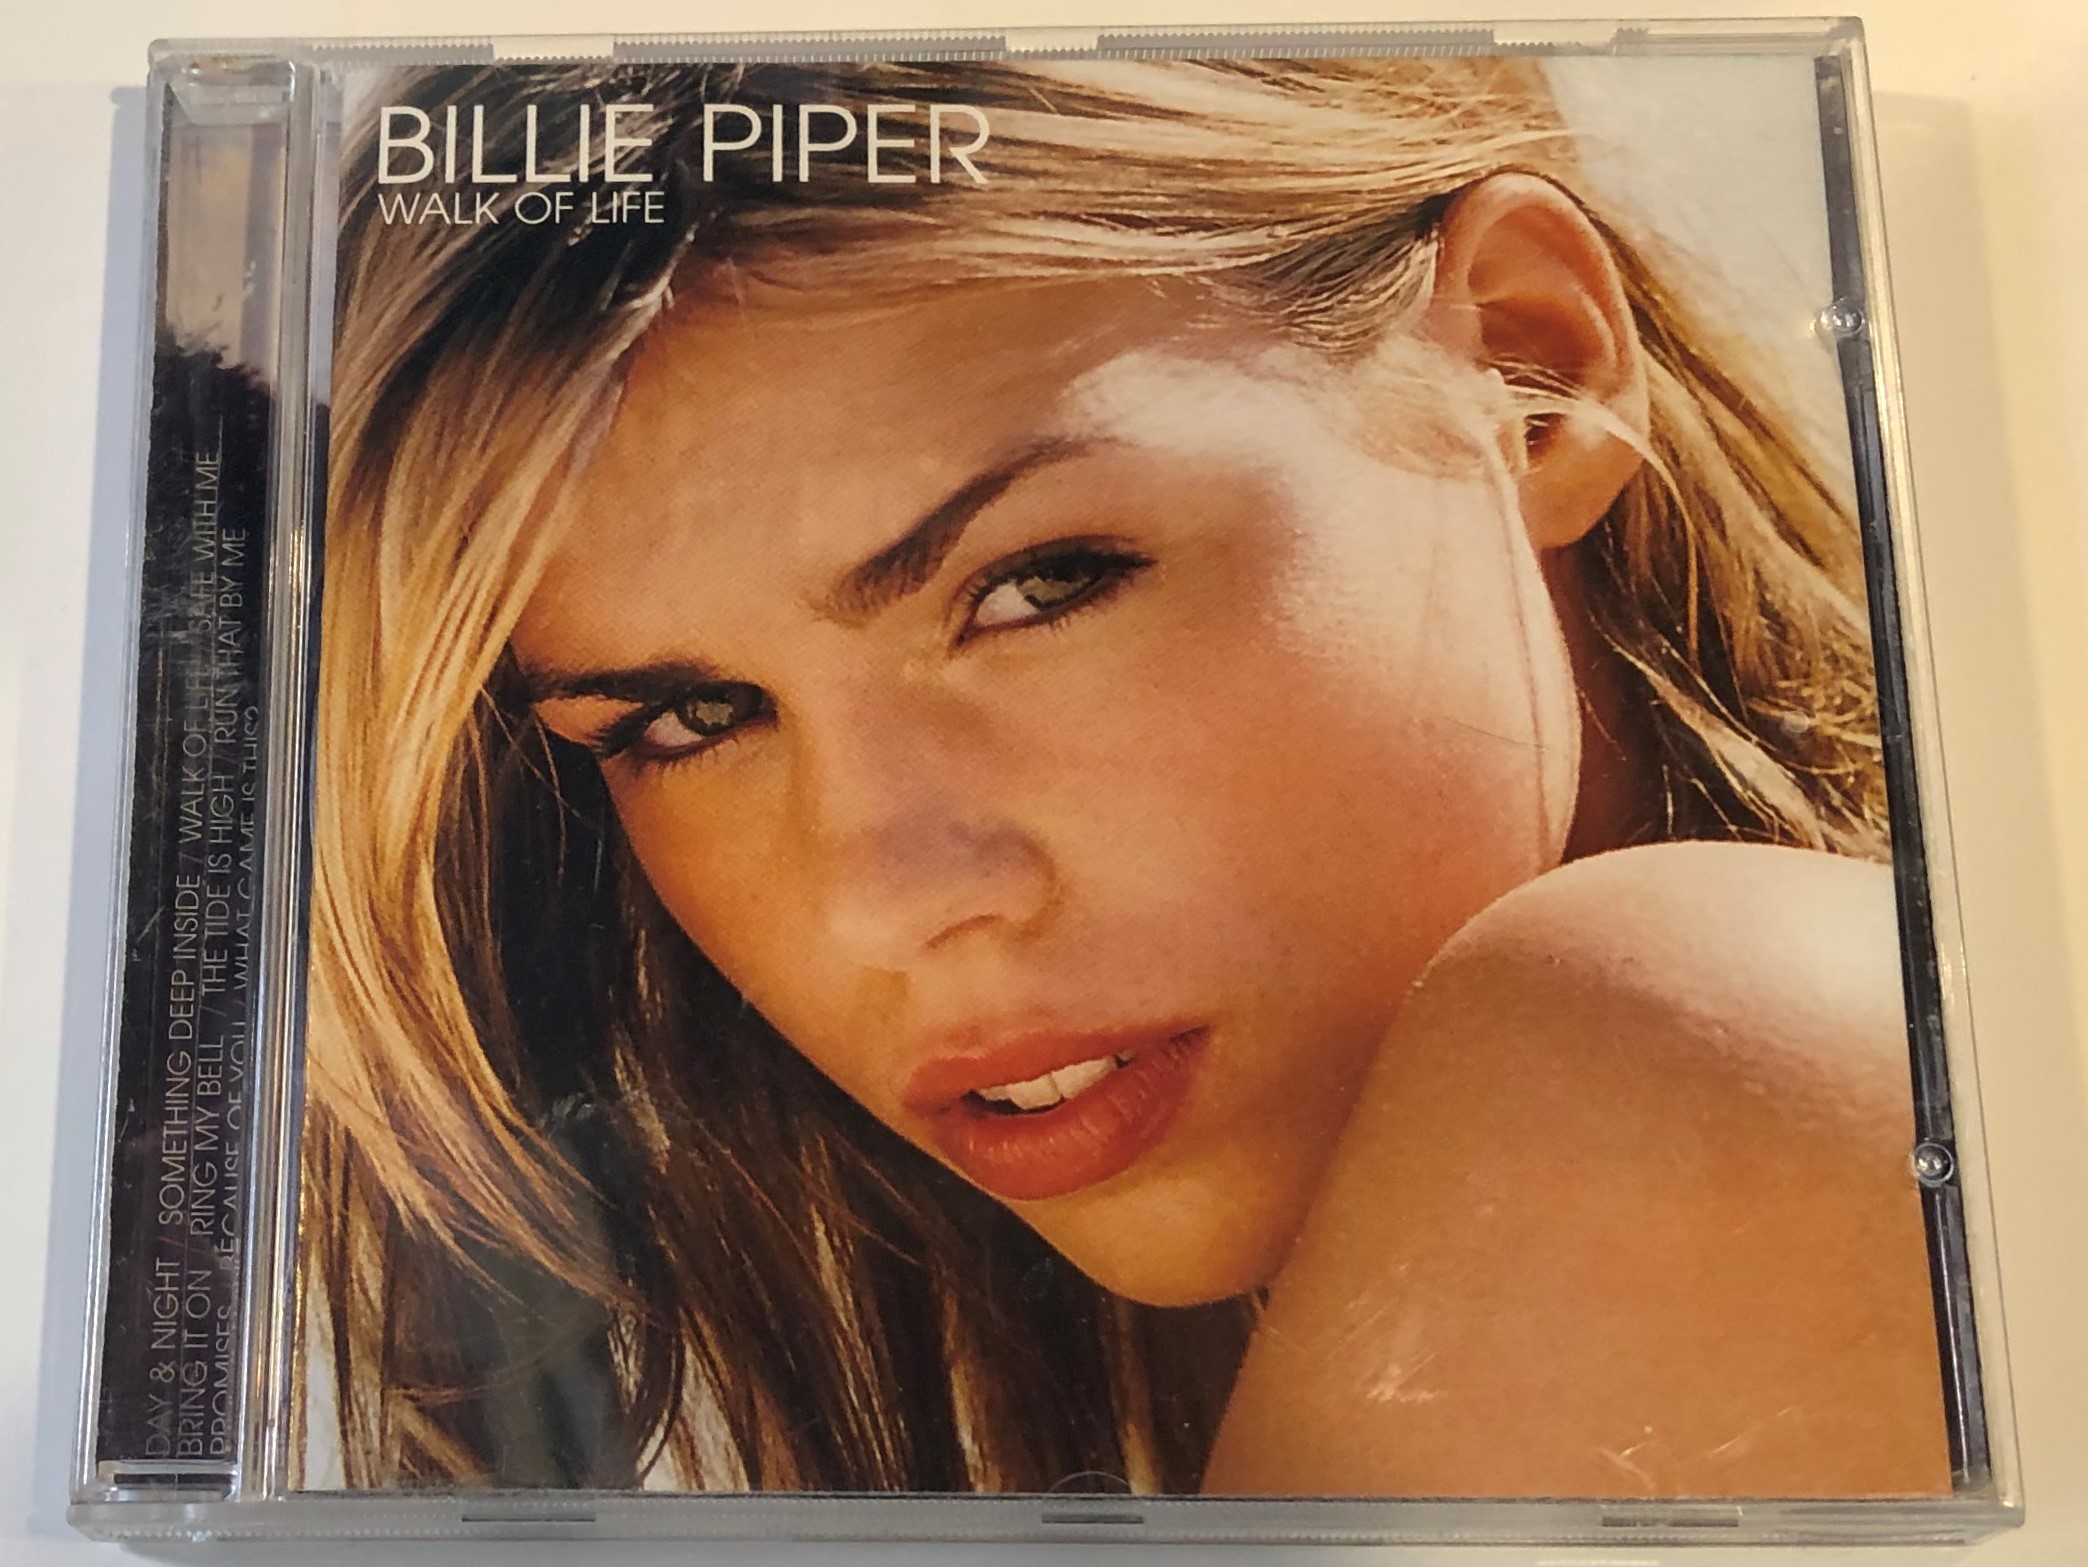 billie-piper-walk-of-life-day-night-something-deep-inside-walk-of-life-safe-with-me-bring-it-on-ring-my-bell-the-tide-is-high-run-that-by-me-promises-because-of-you-what-game-is-th-1-.jpg